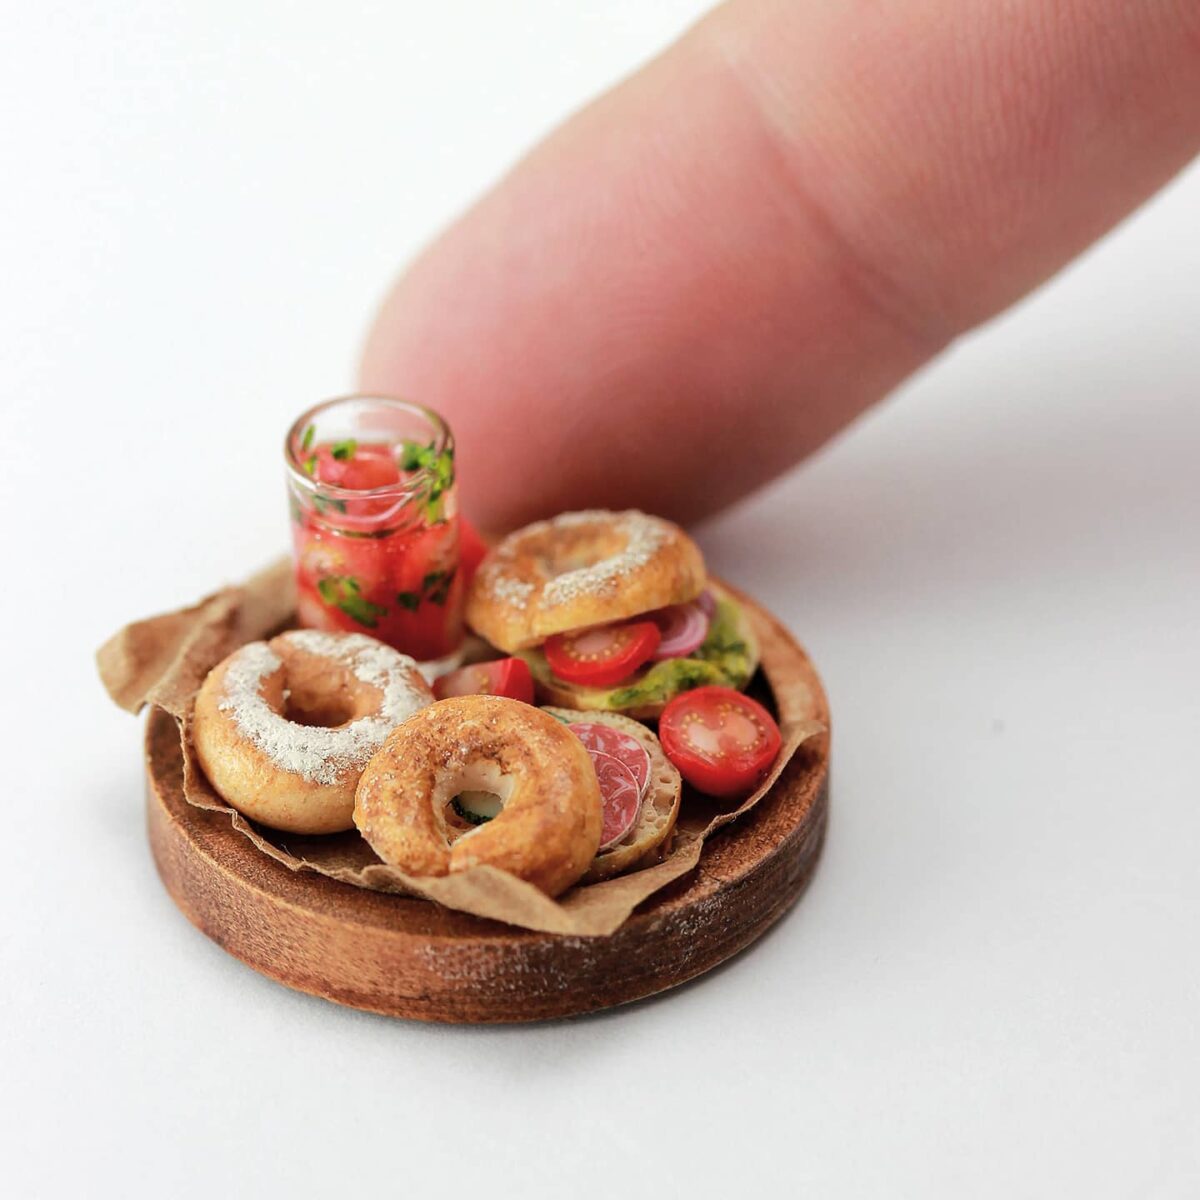 Whimsical Miniature Food Sculptures By Shay Aaron (9)